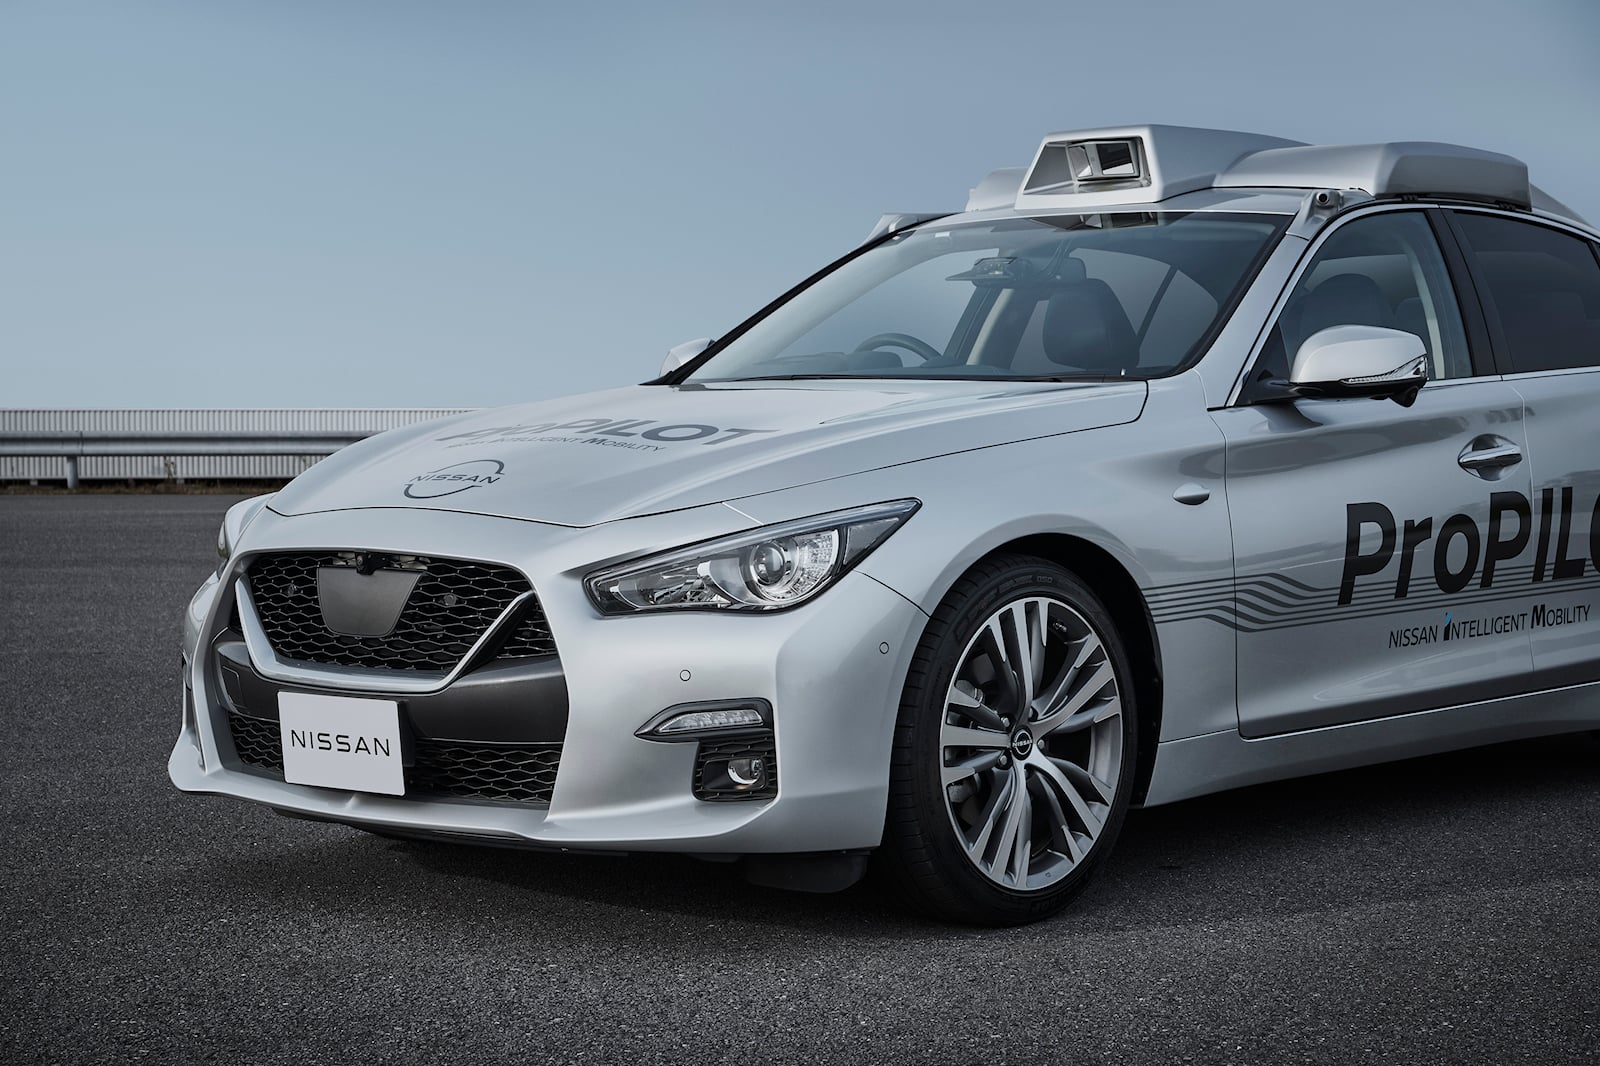 Nissans New Self-Driving Tech Coming In 2030